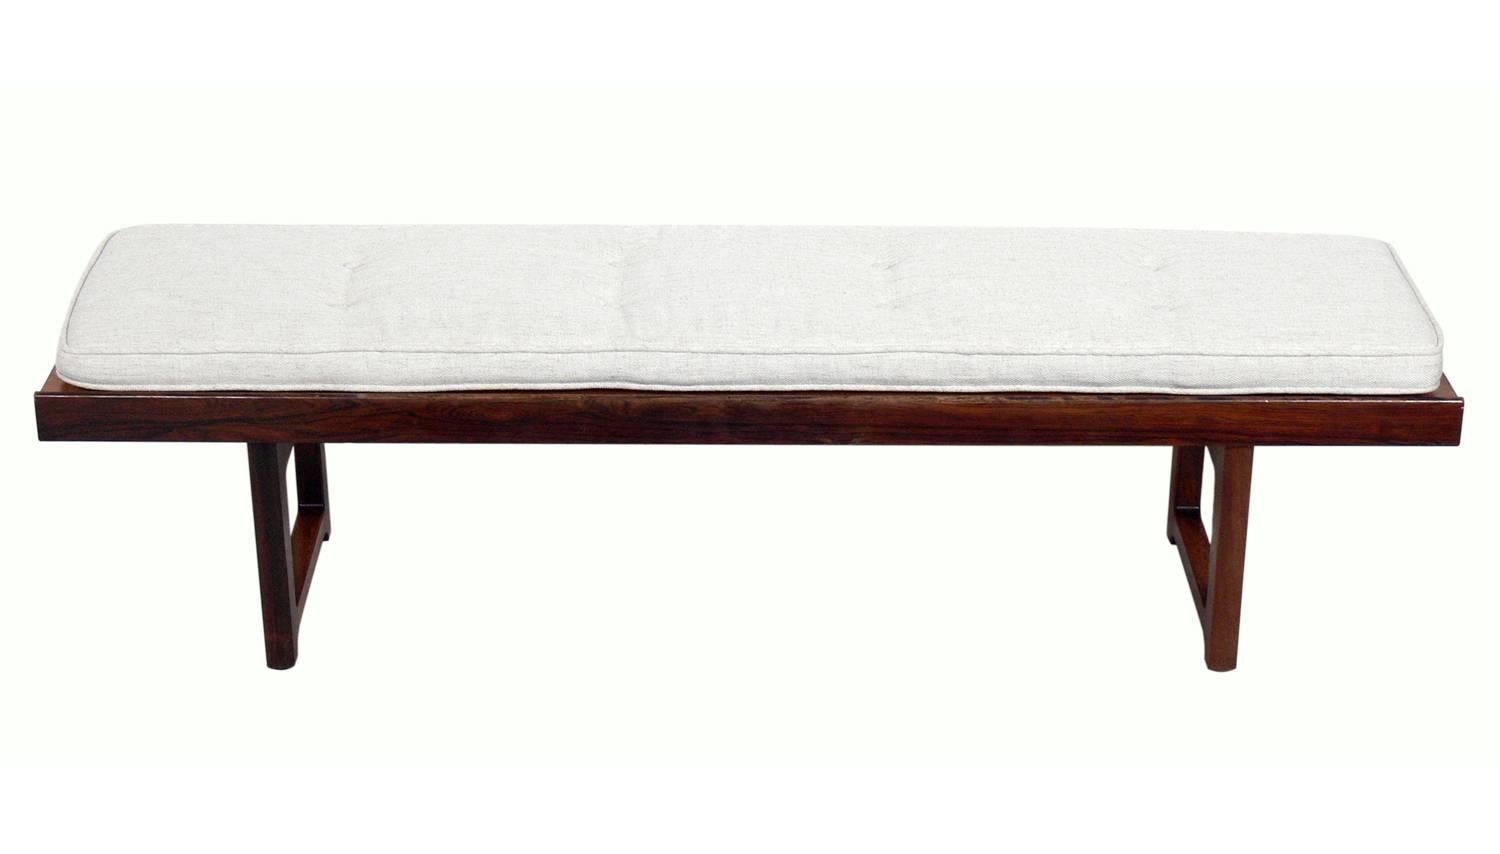 Danish modern rosewood bench or table, designed by Bruksbo, Norway, circa 1960s. It has been reupholstered in an ivory color fabric. Currently being refinished. Price noted below includes refinishing.